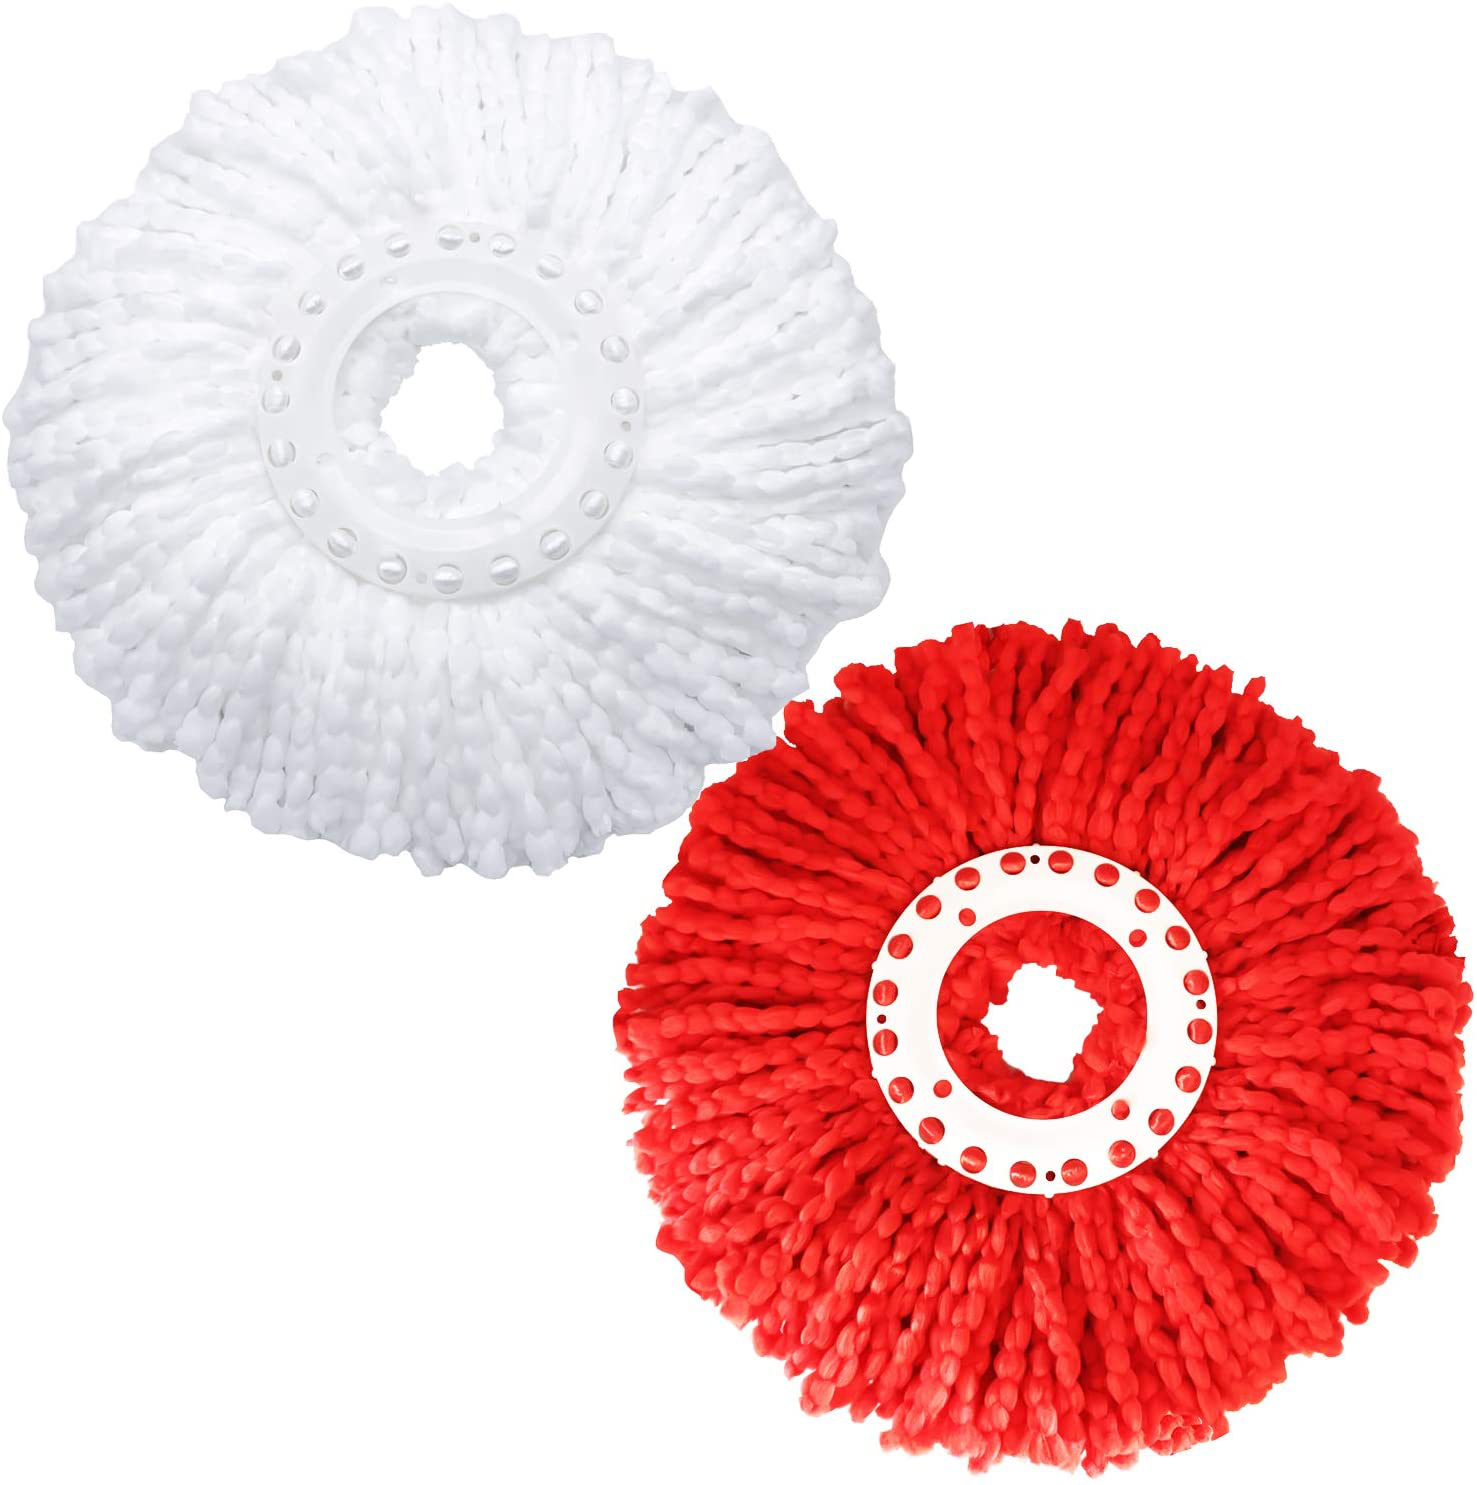 2 Pack Mop Heads Replacements Microfiber Spin Mop Replacement Head Original Thick Fluffy for 360 Spinning Mop Refills, Universal Standard Round 6.3 inch Size, White and Red